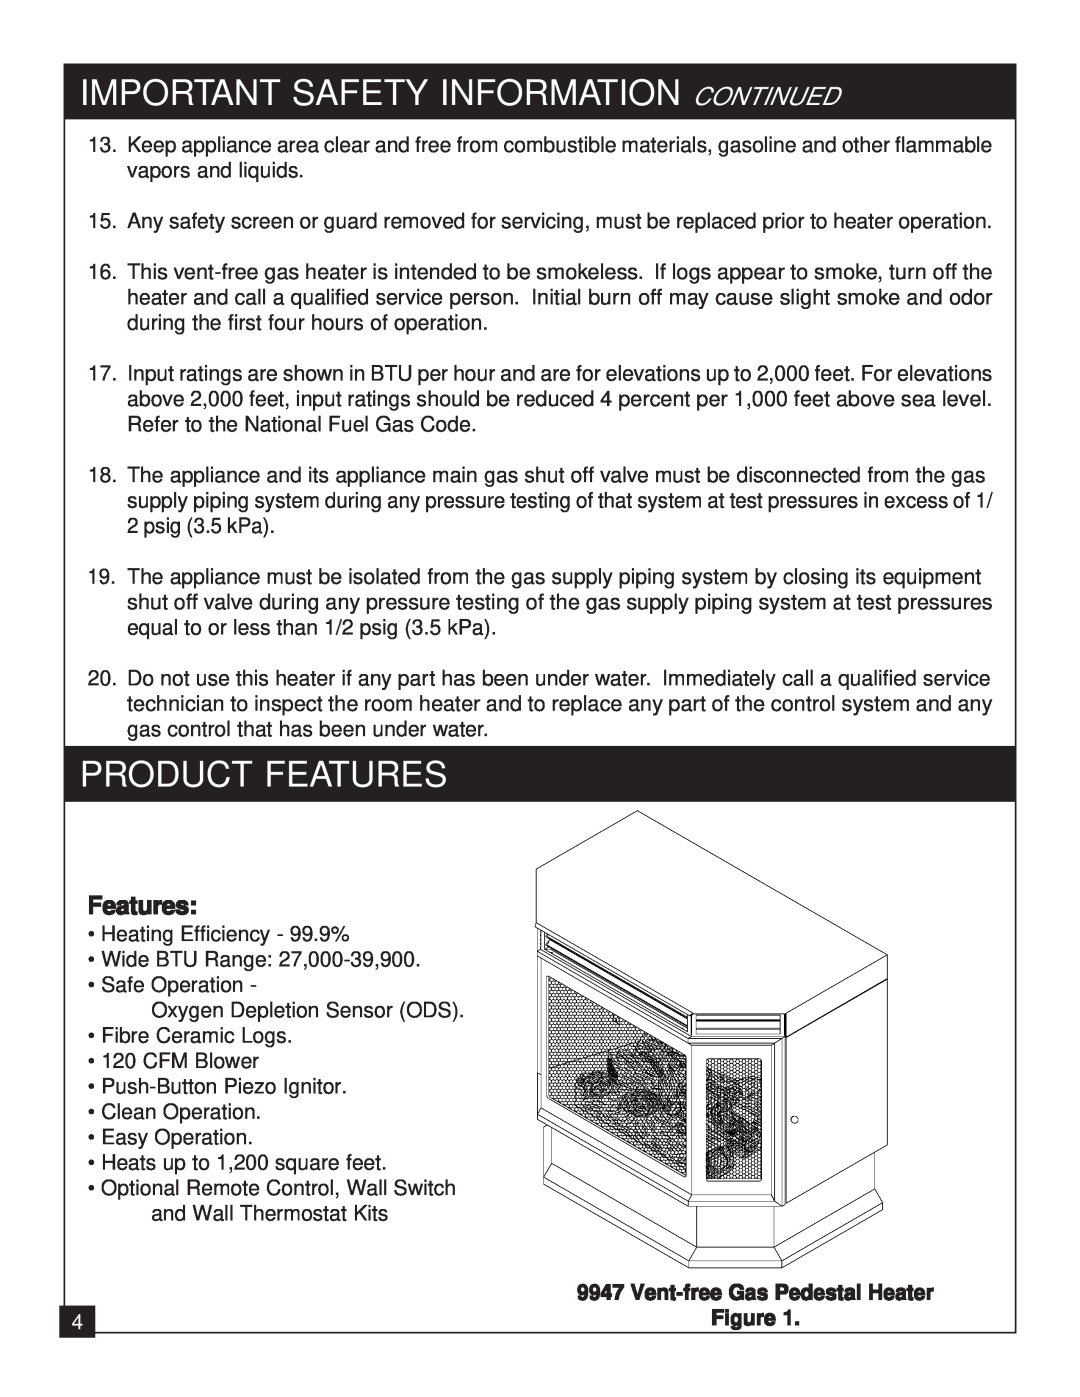 United States Stove 9947 Important Safety Information Continued, Product Features, Vent-freeGas Pedestal Heater Figure 